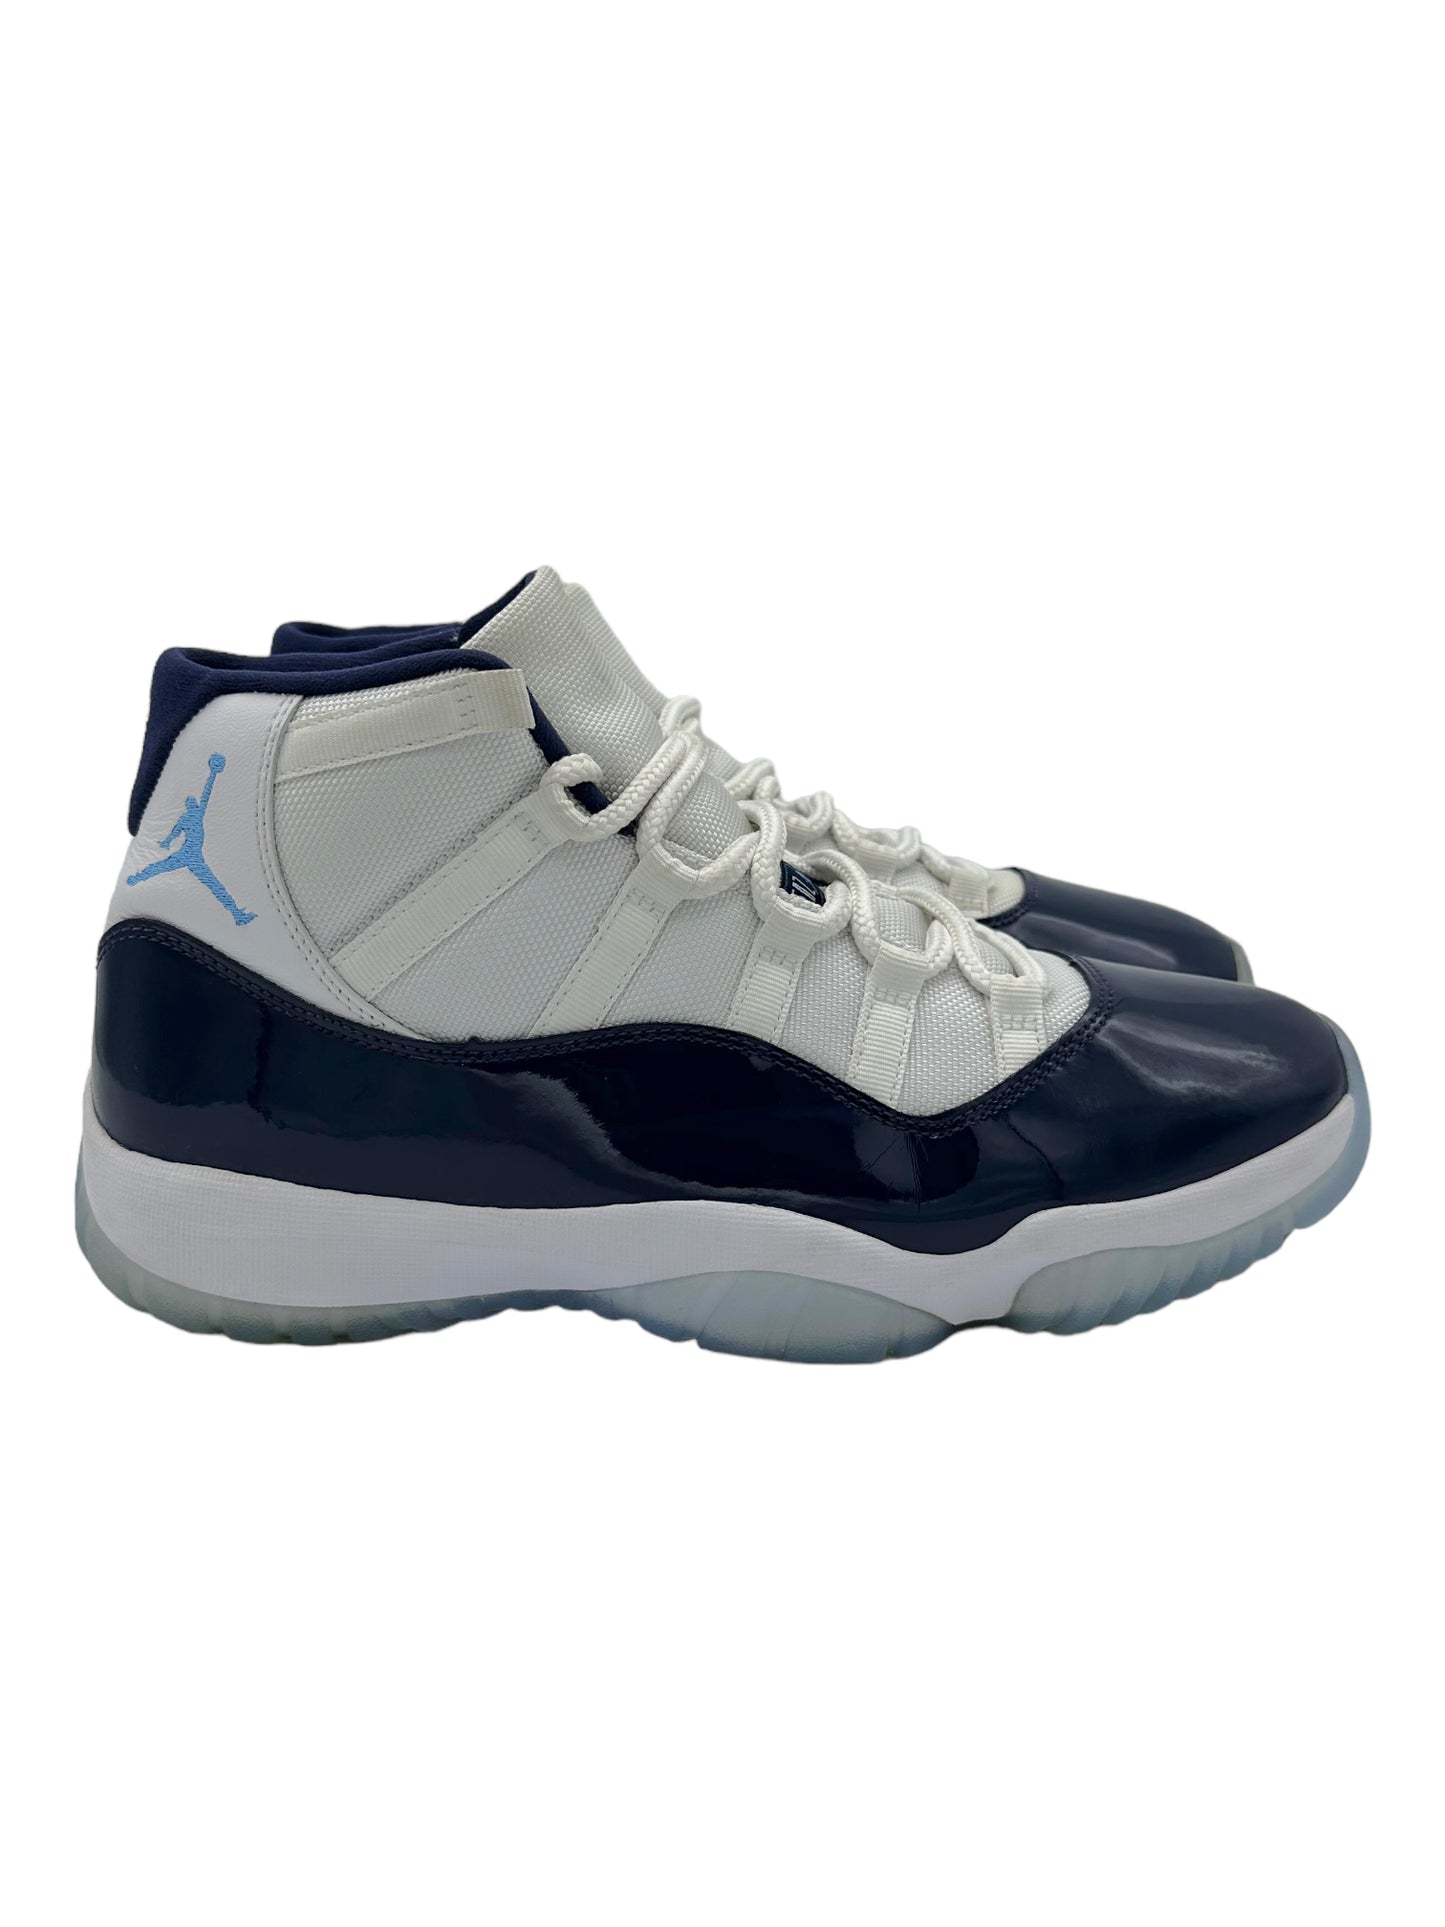 Nike Air Jordan 11 Retro "Navy/Win Like '82" Sneakers - Genuine Design Luxury Consignment. New & Pre-Owned Clothing, Shoes, & Accessories. Calgary, Canada